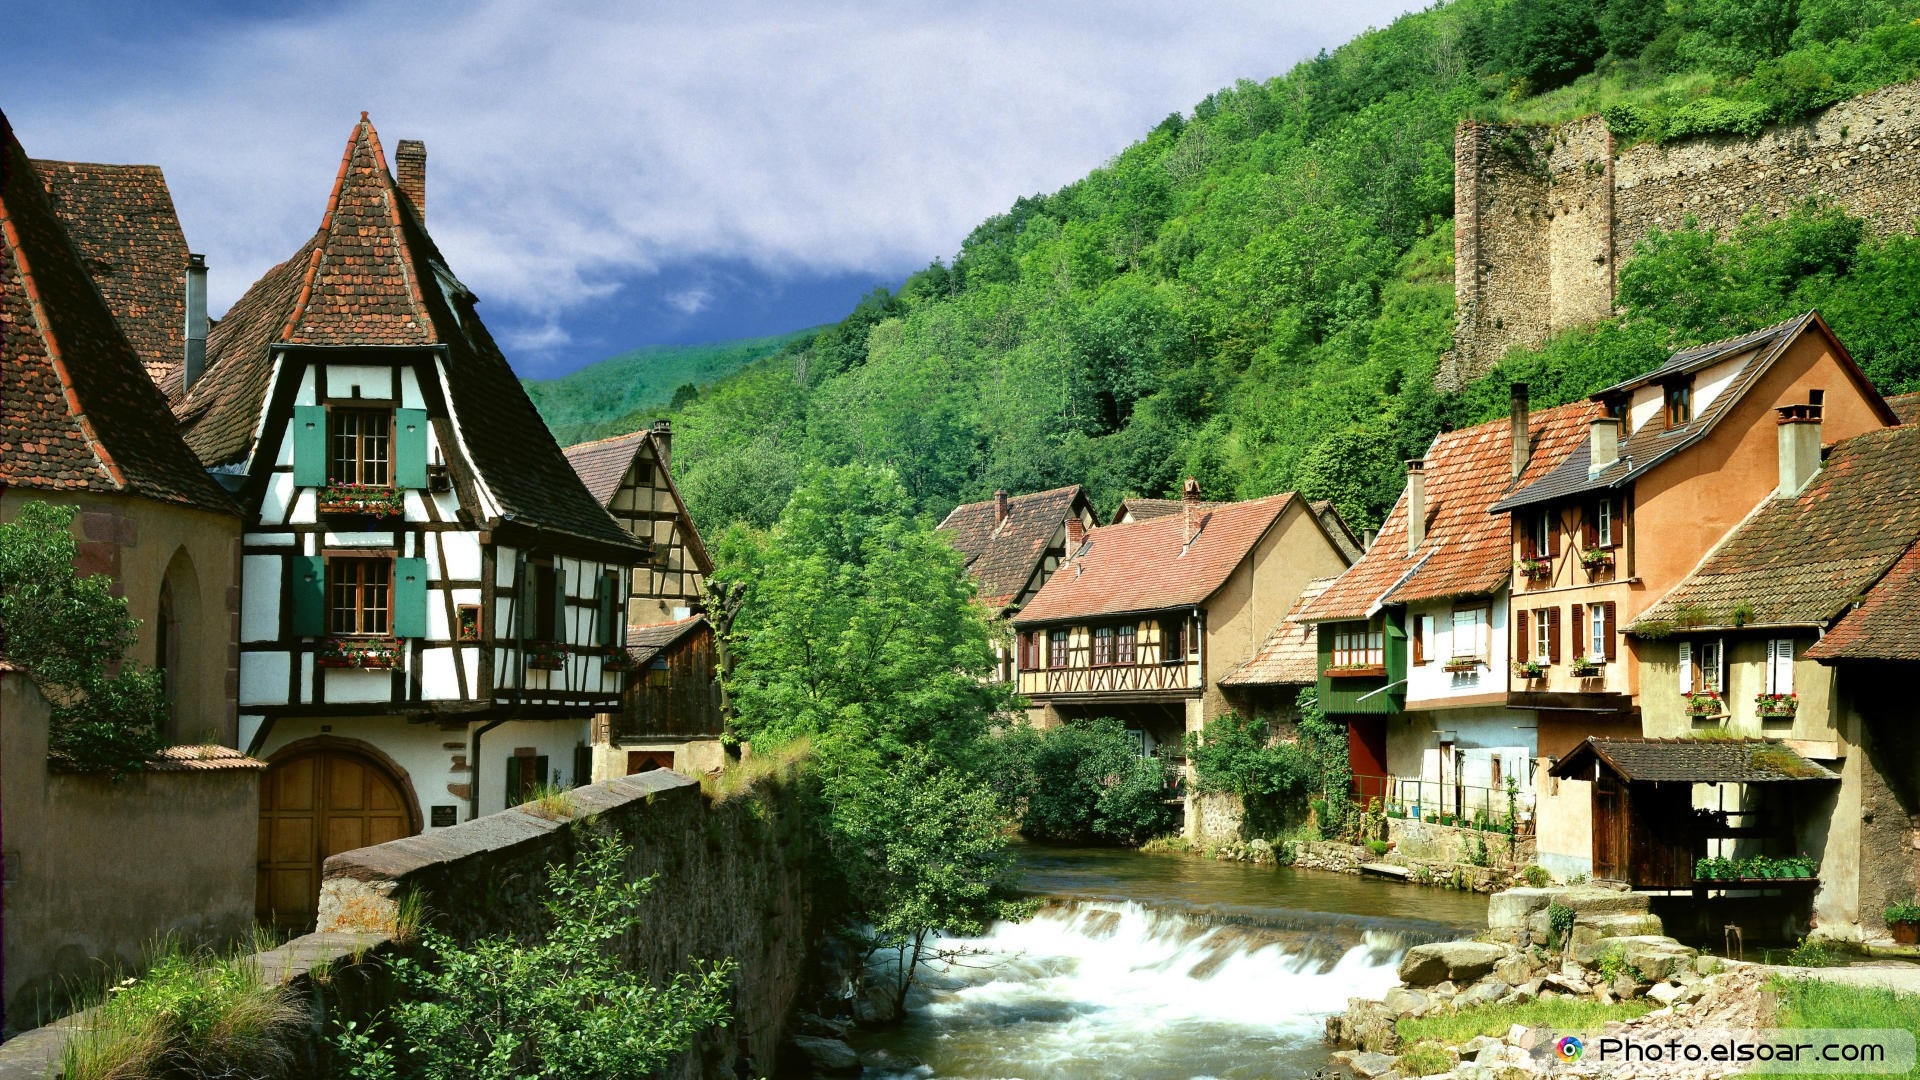 A Beautiful Life Free Hd Pc Desktop Wallpaper - Small Town In The Mountains  - 1920x1080 Wallpaper 